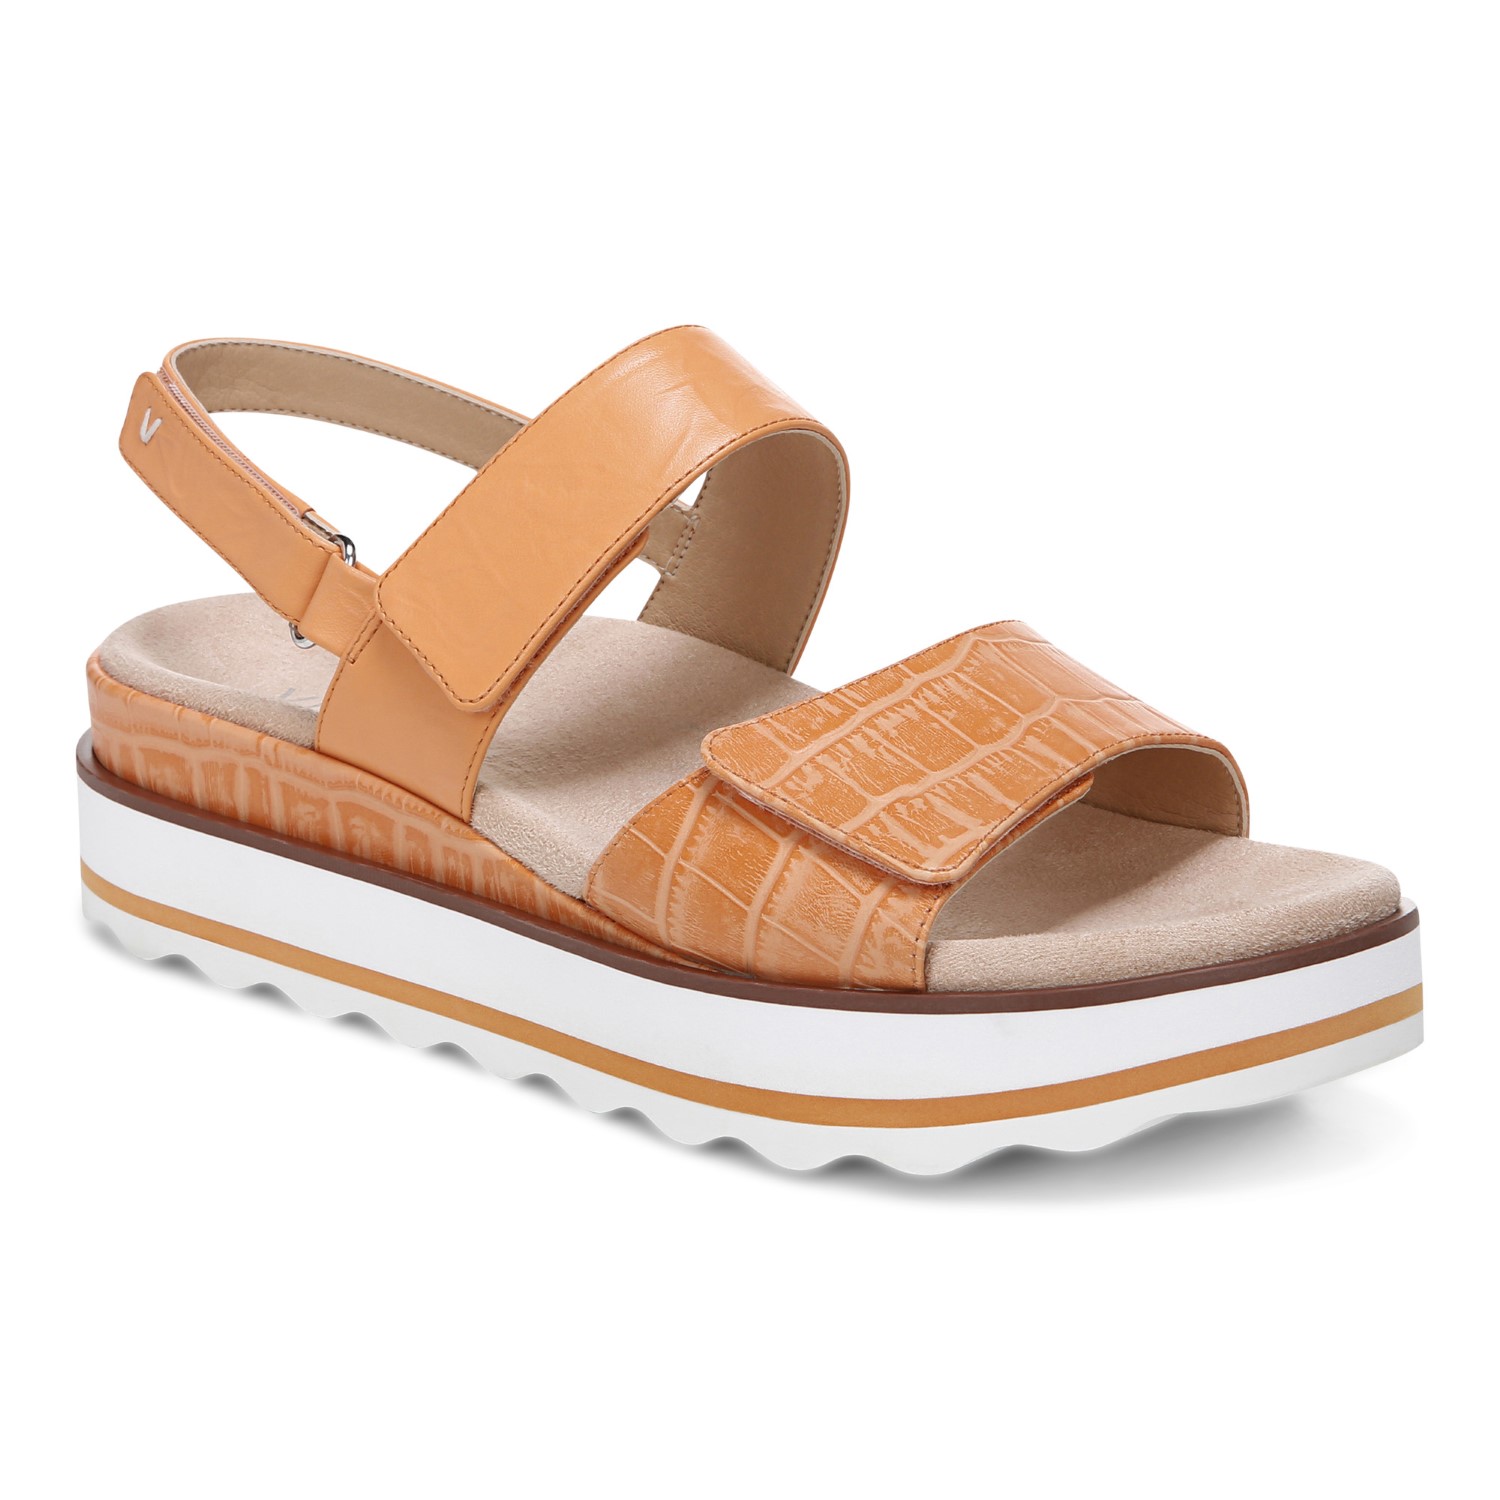 arch support sandals with backstrap